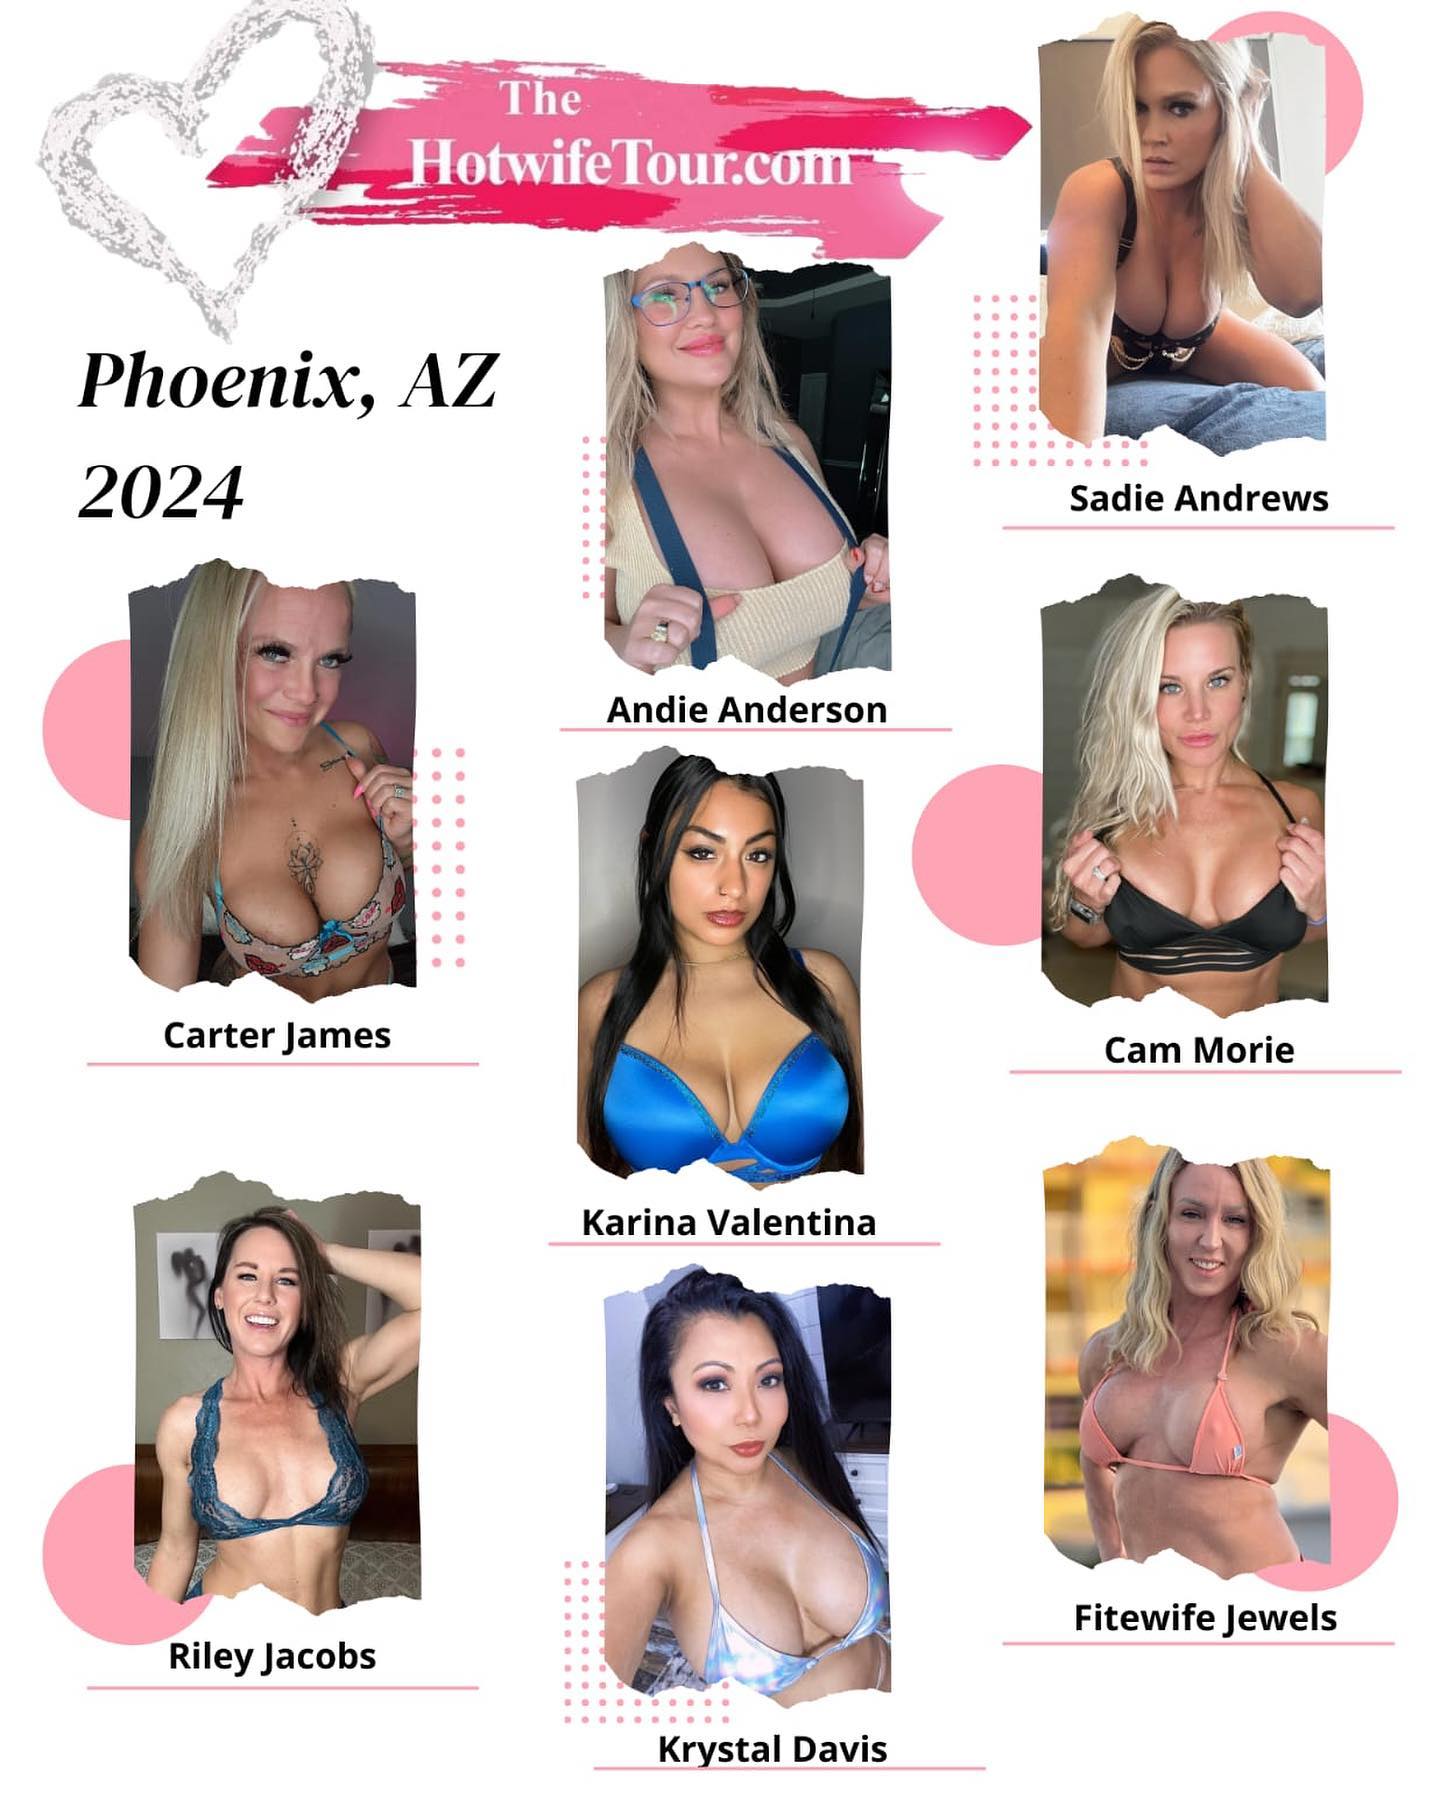 @thehotwifetour will be in Phoenix, Az from June 6-9!